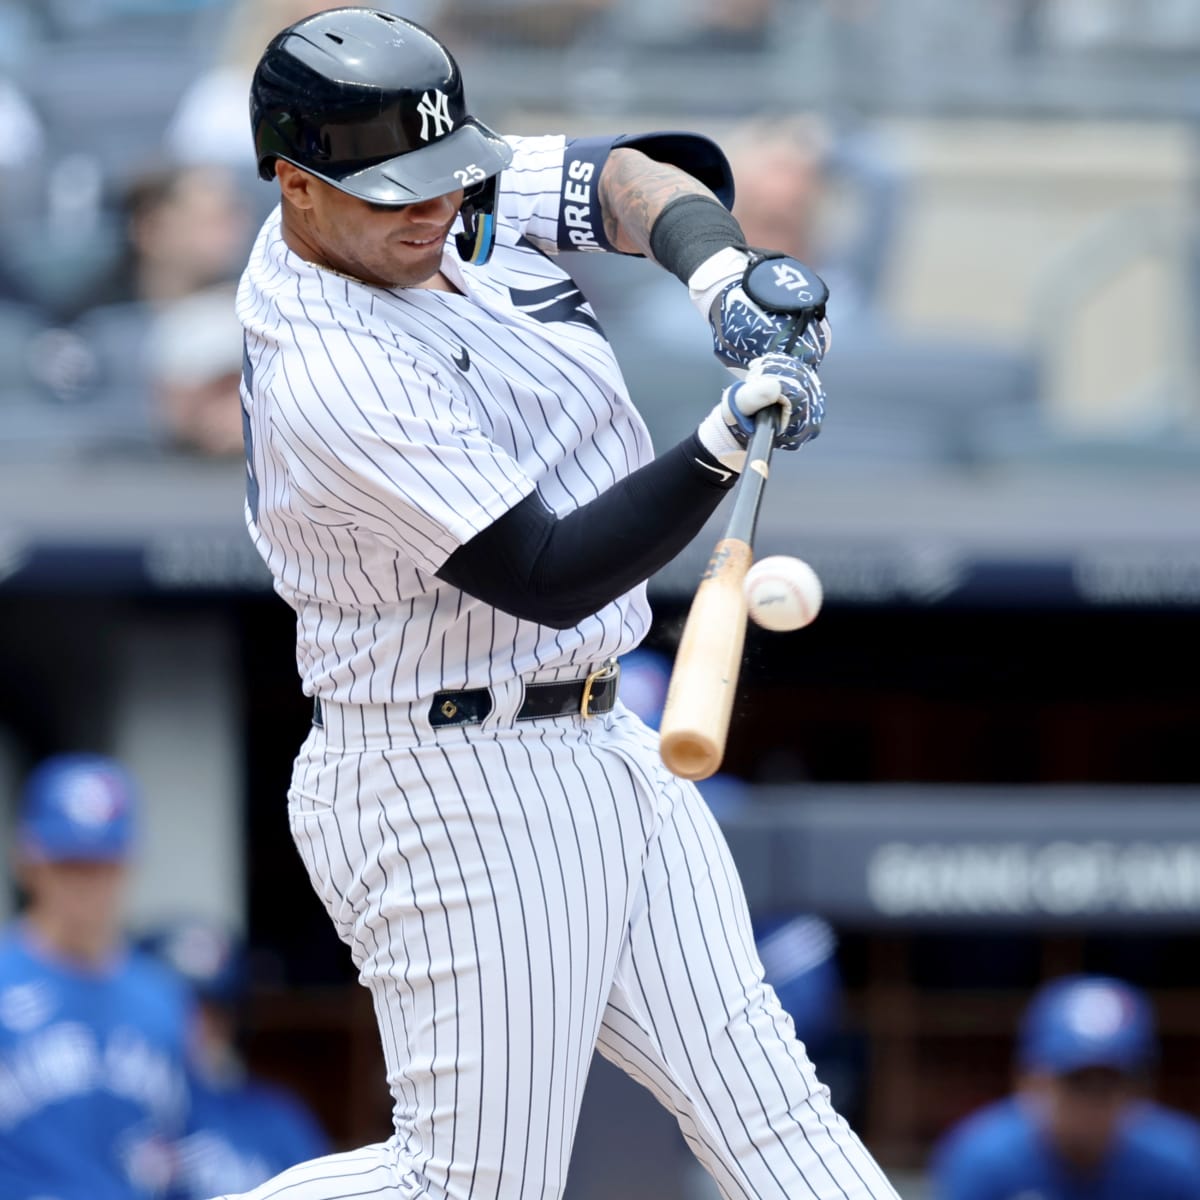 The Yankees need Gleyber Torres to figure it out at the plate